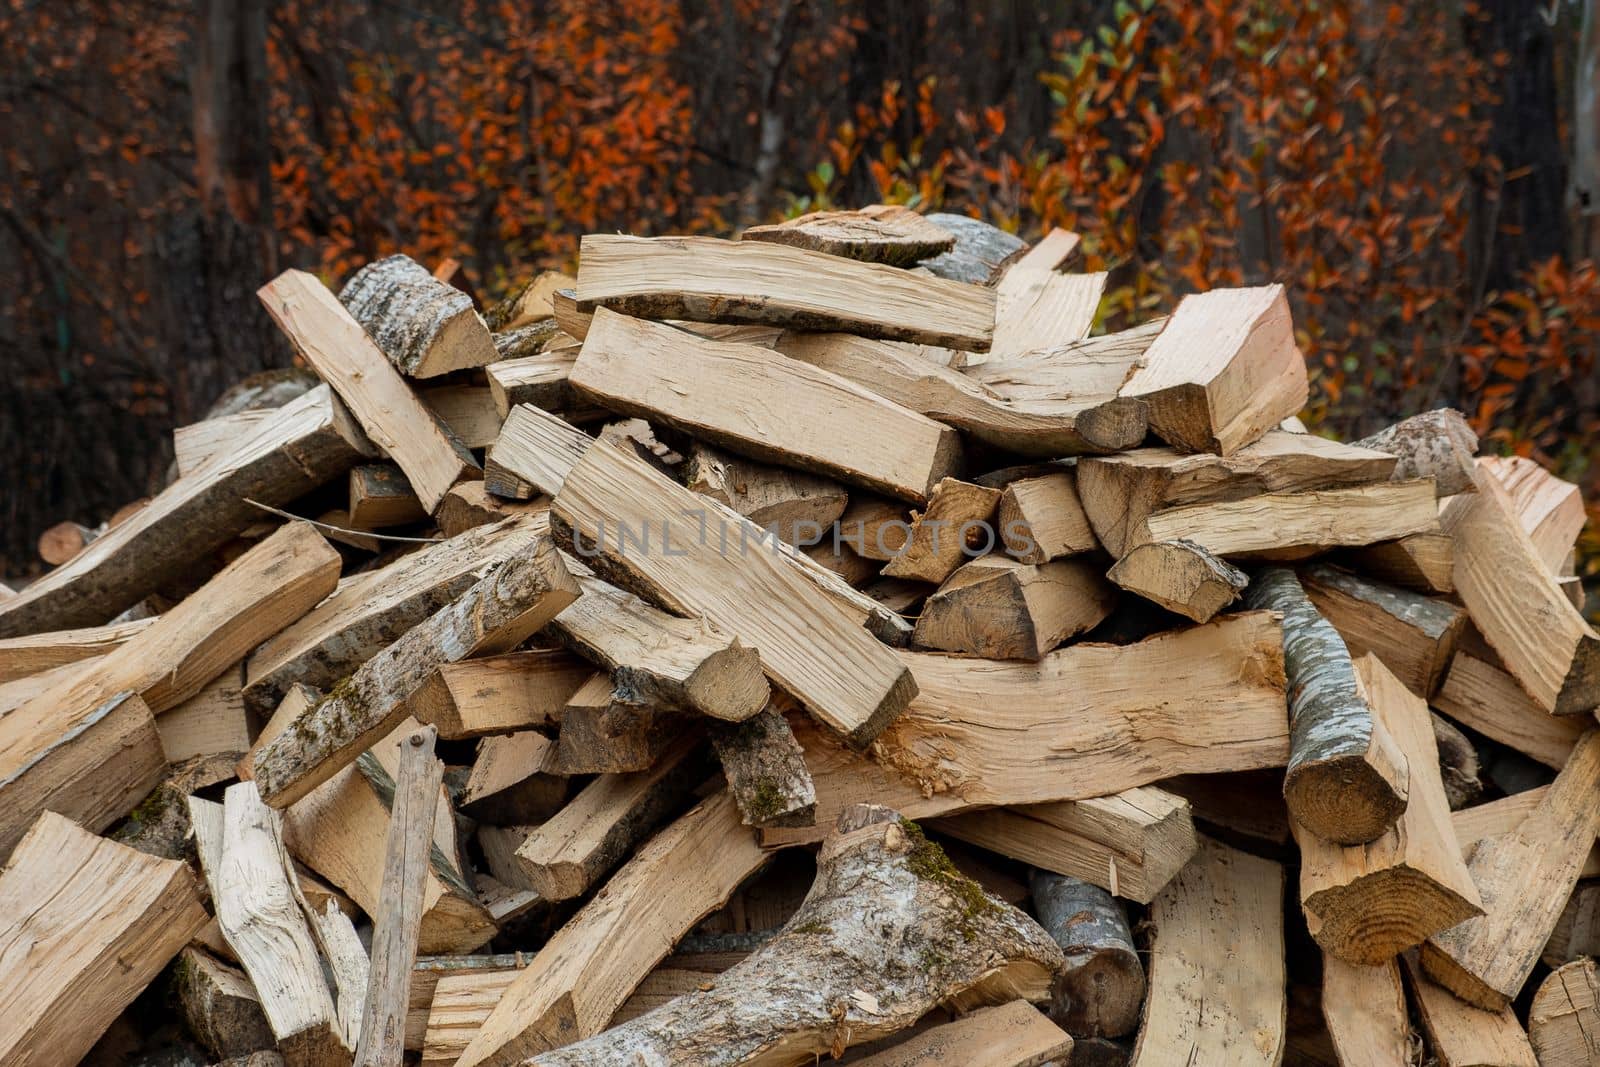 Chopped firewood for heating lies in a pile among the trees in late autumn. Selective focus.